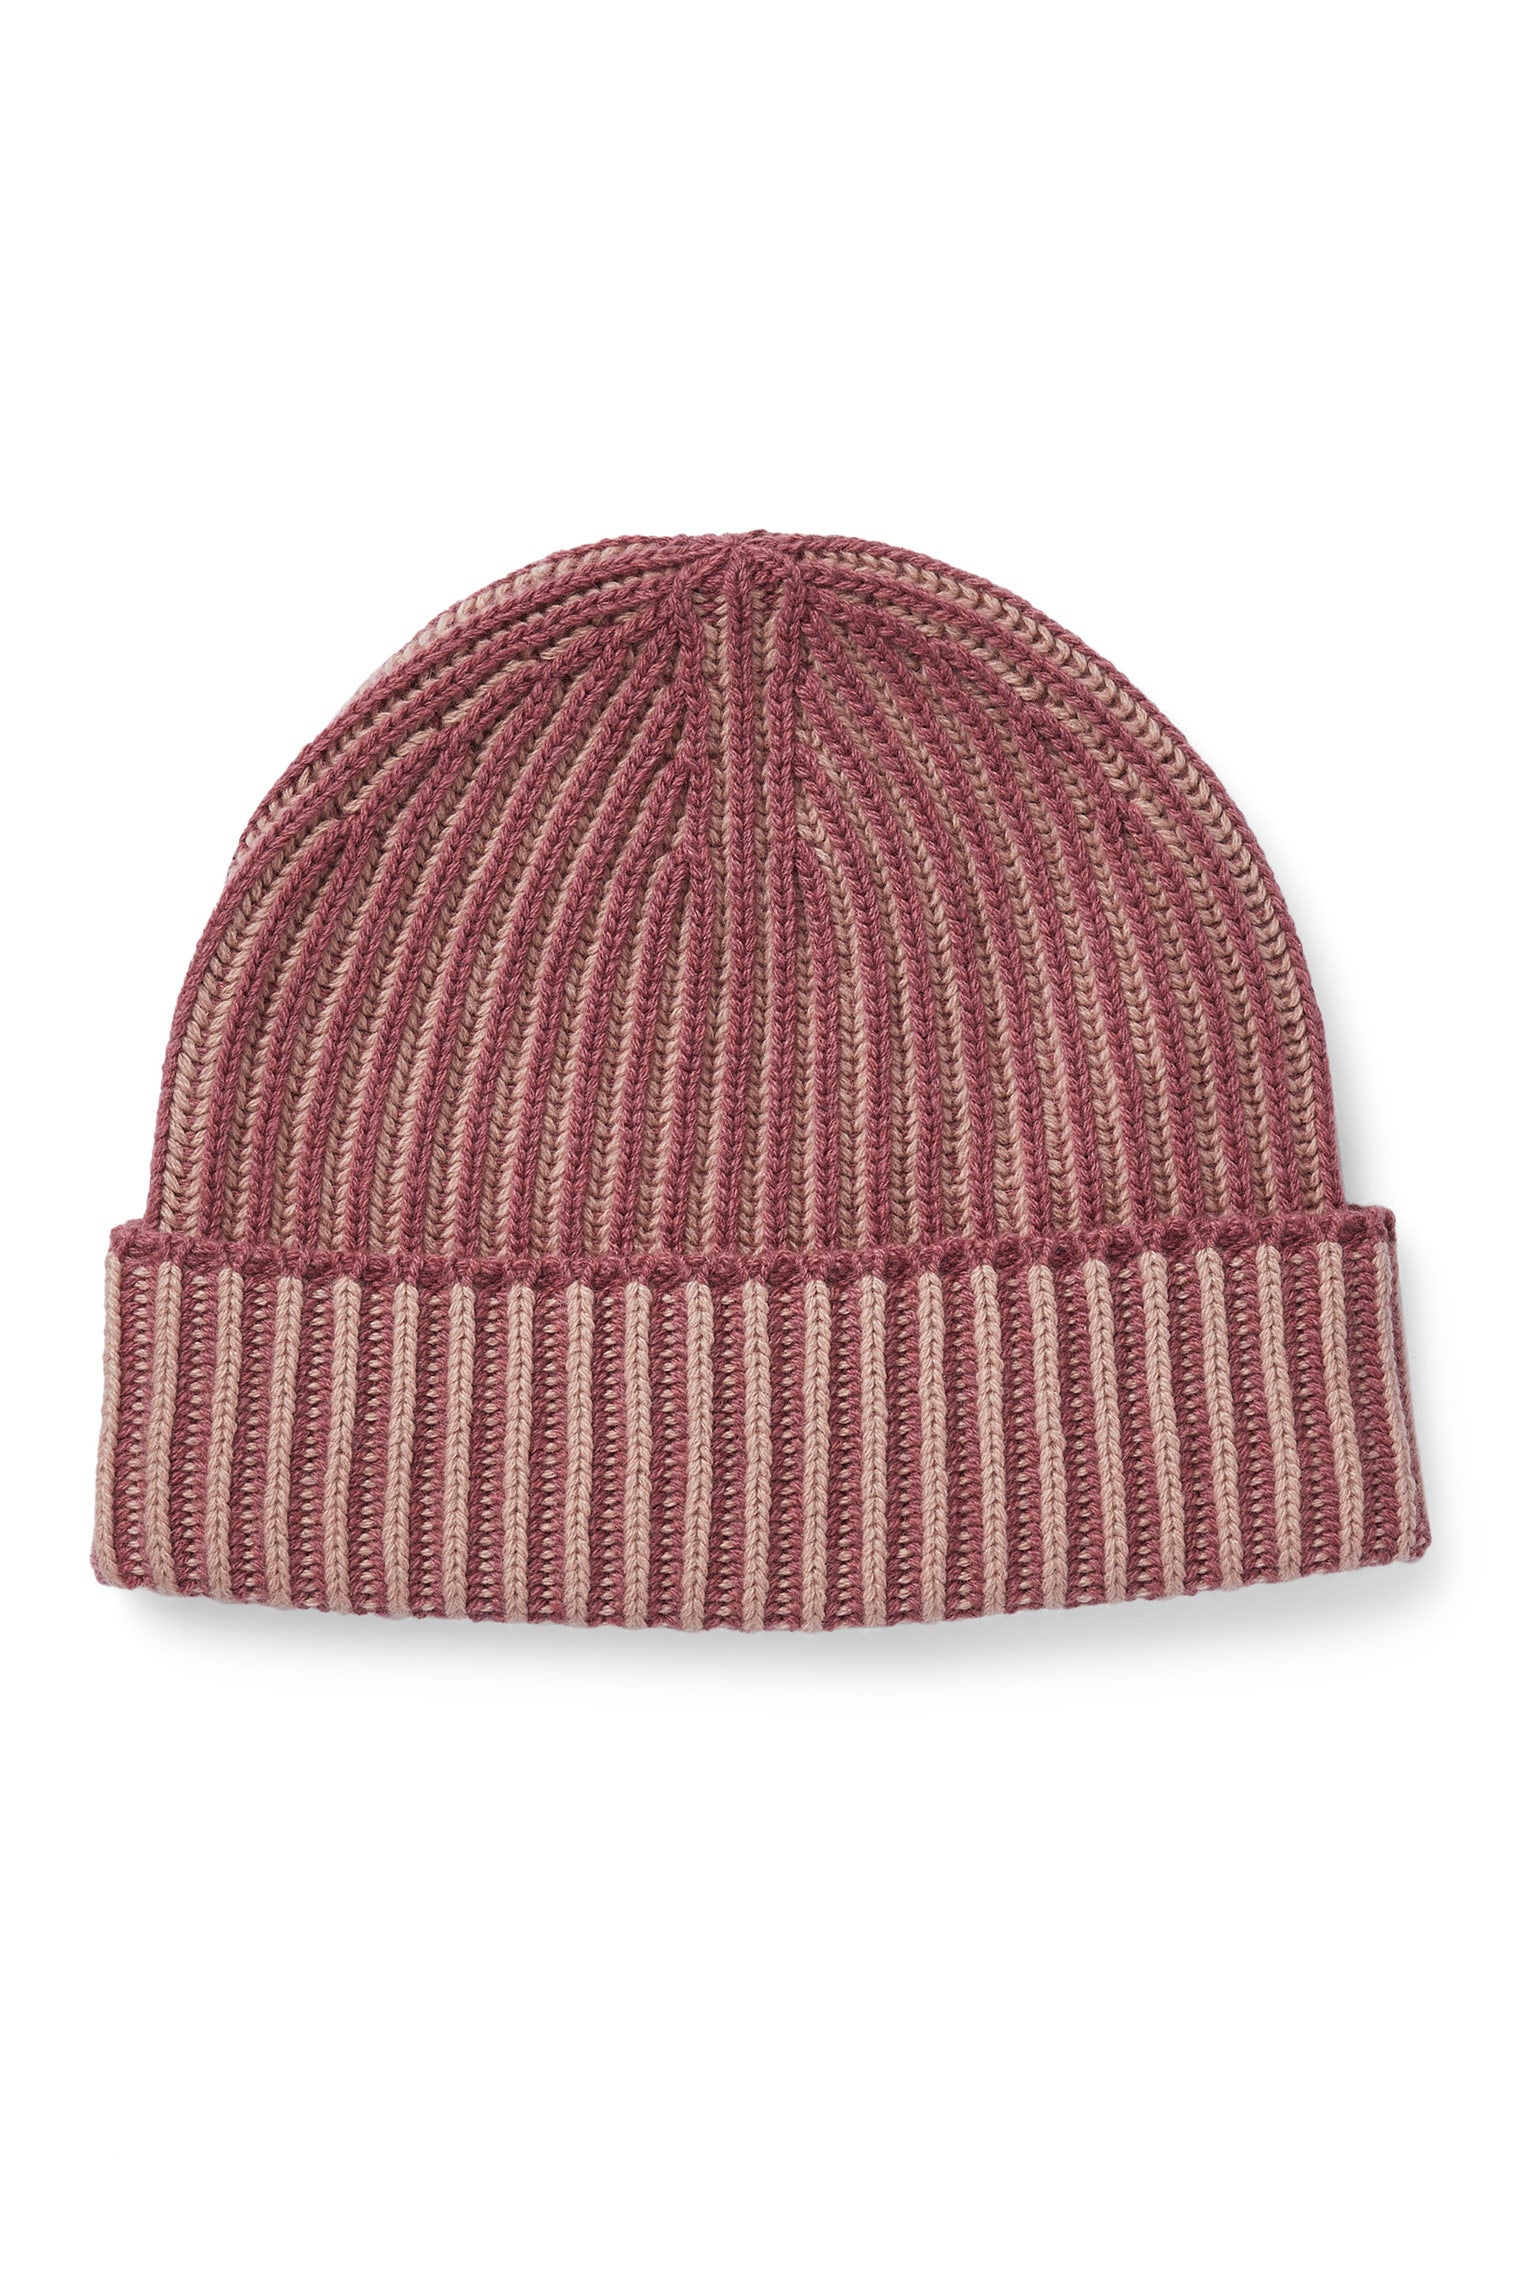 Two-Tone Cashmere Ski Beanie - New Season Hat Collection - Lock & Co. Hatters London UK